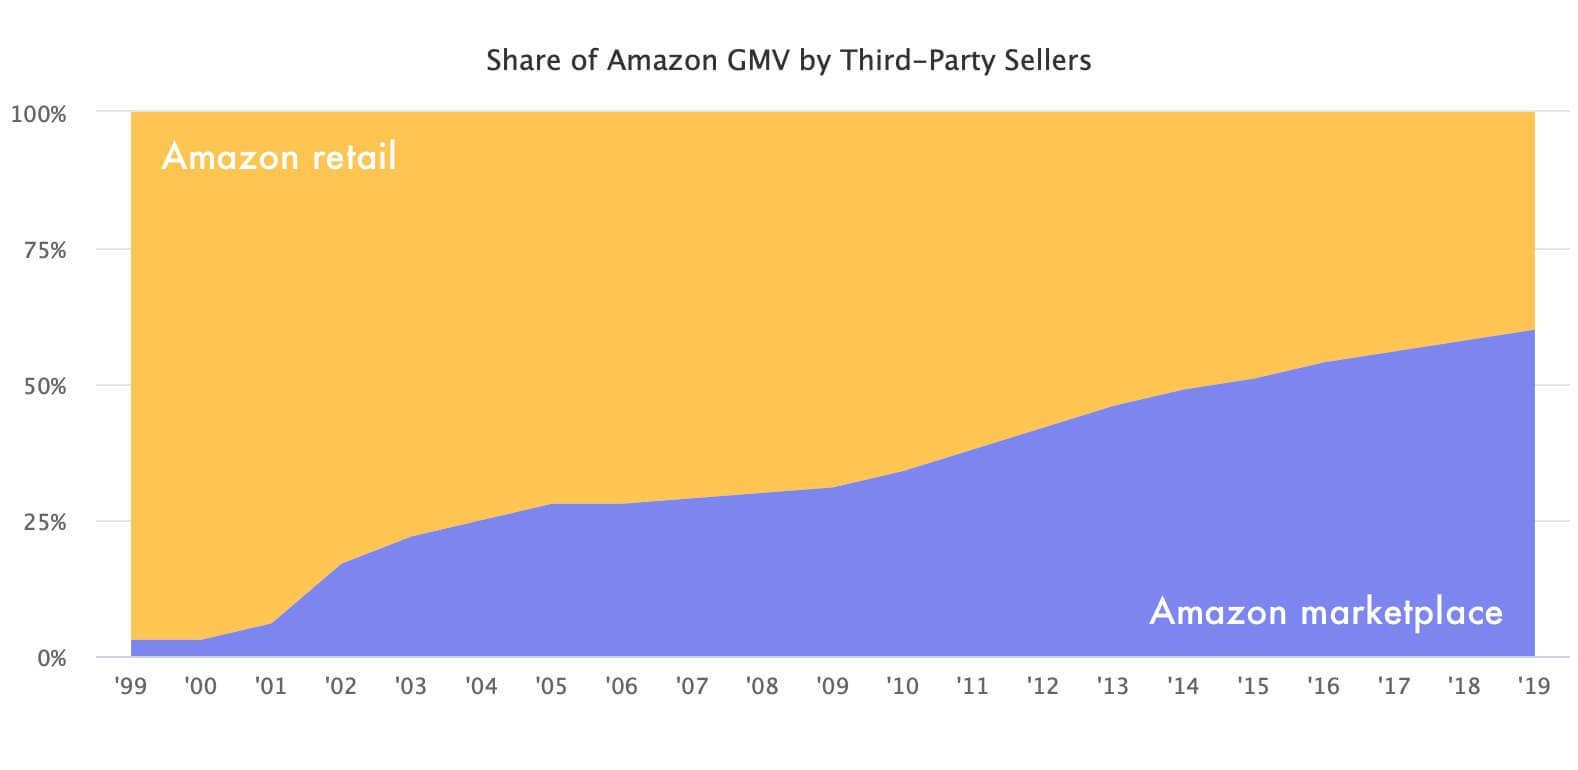 Share of Amazon GMV by Third-Party Sellers